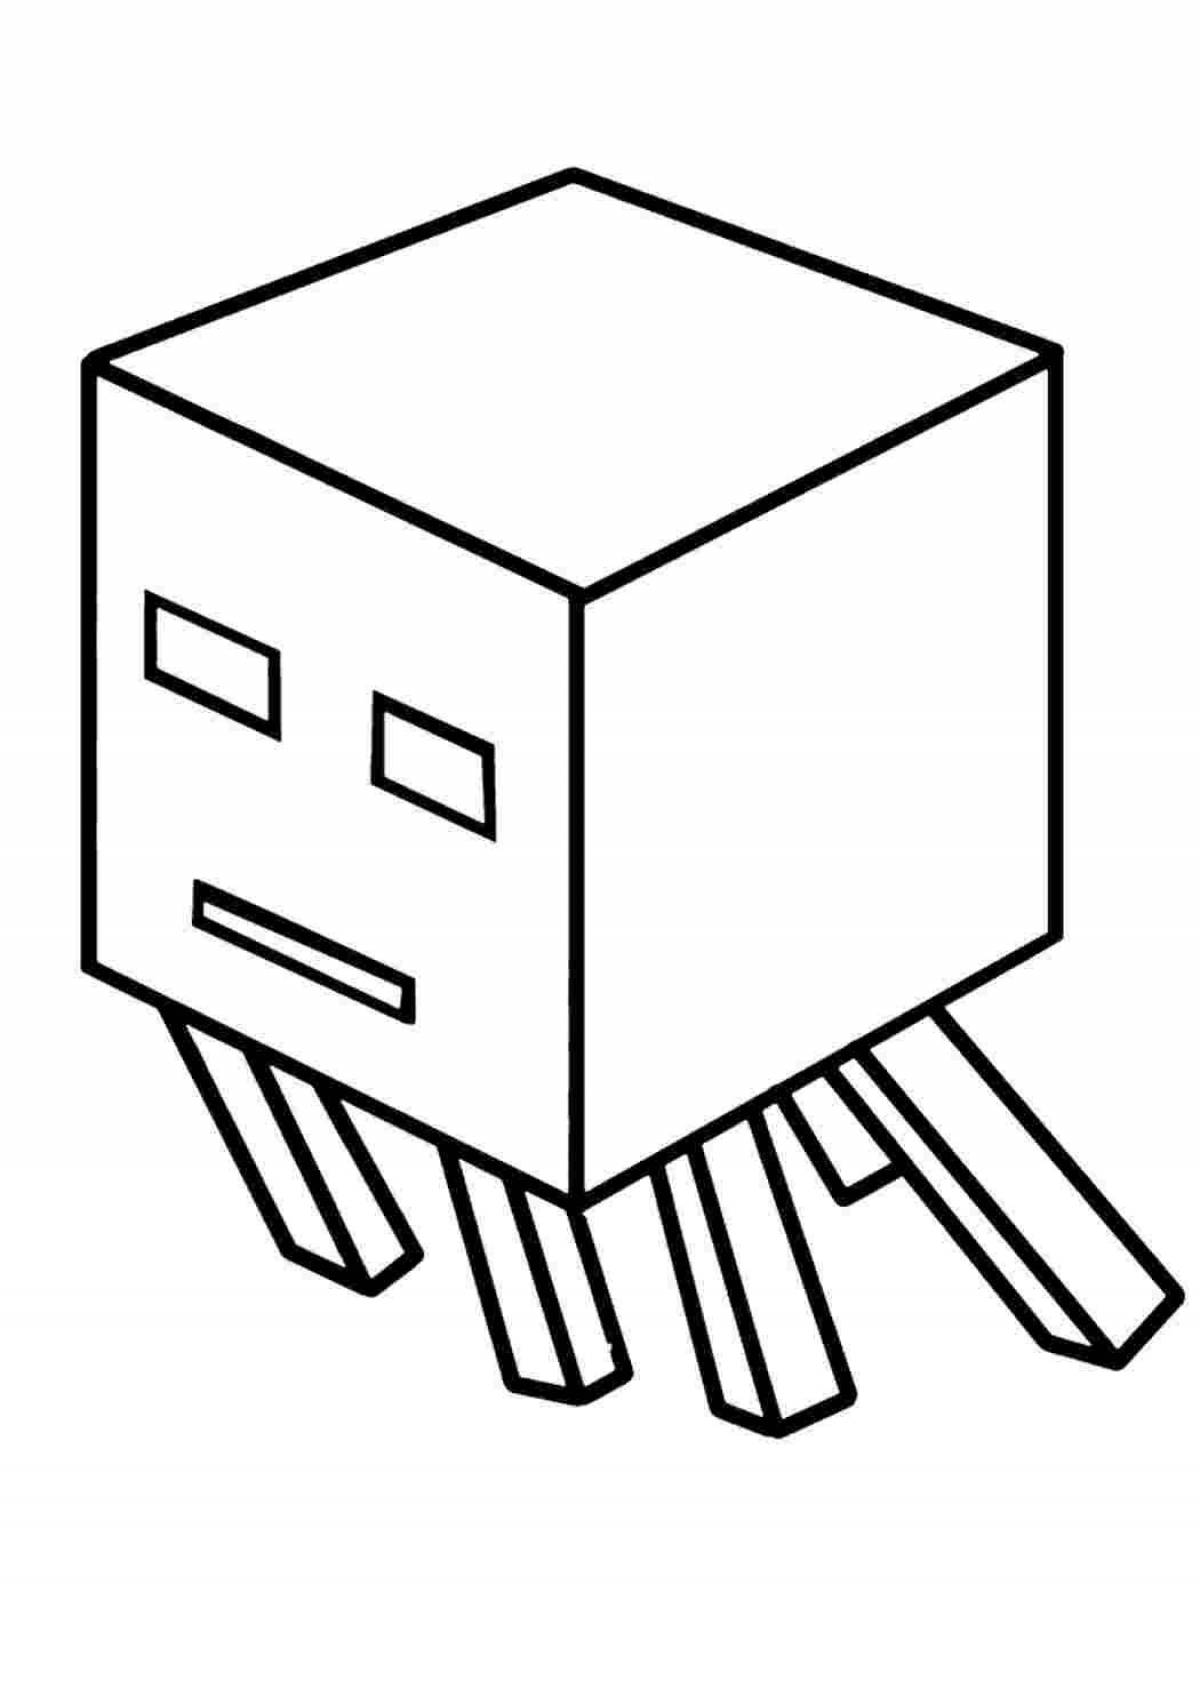 Amazing minecraft food coloring page